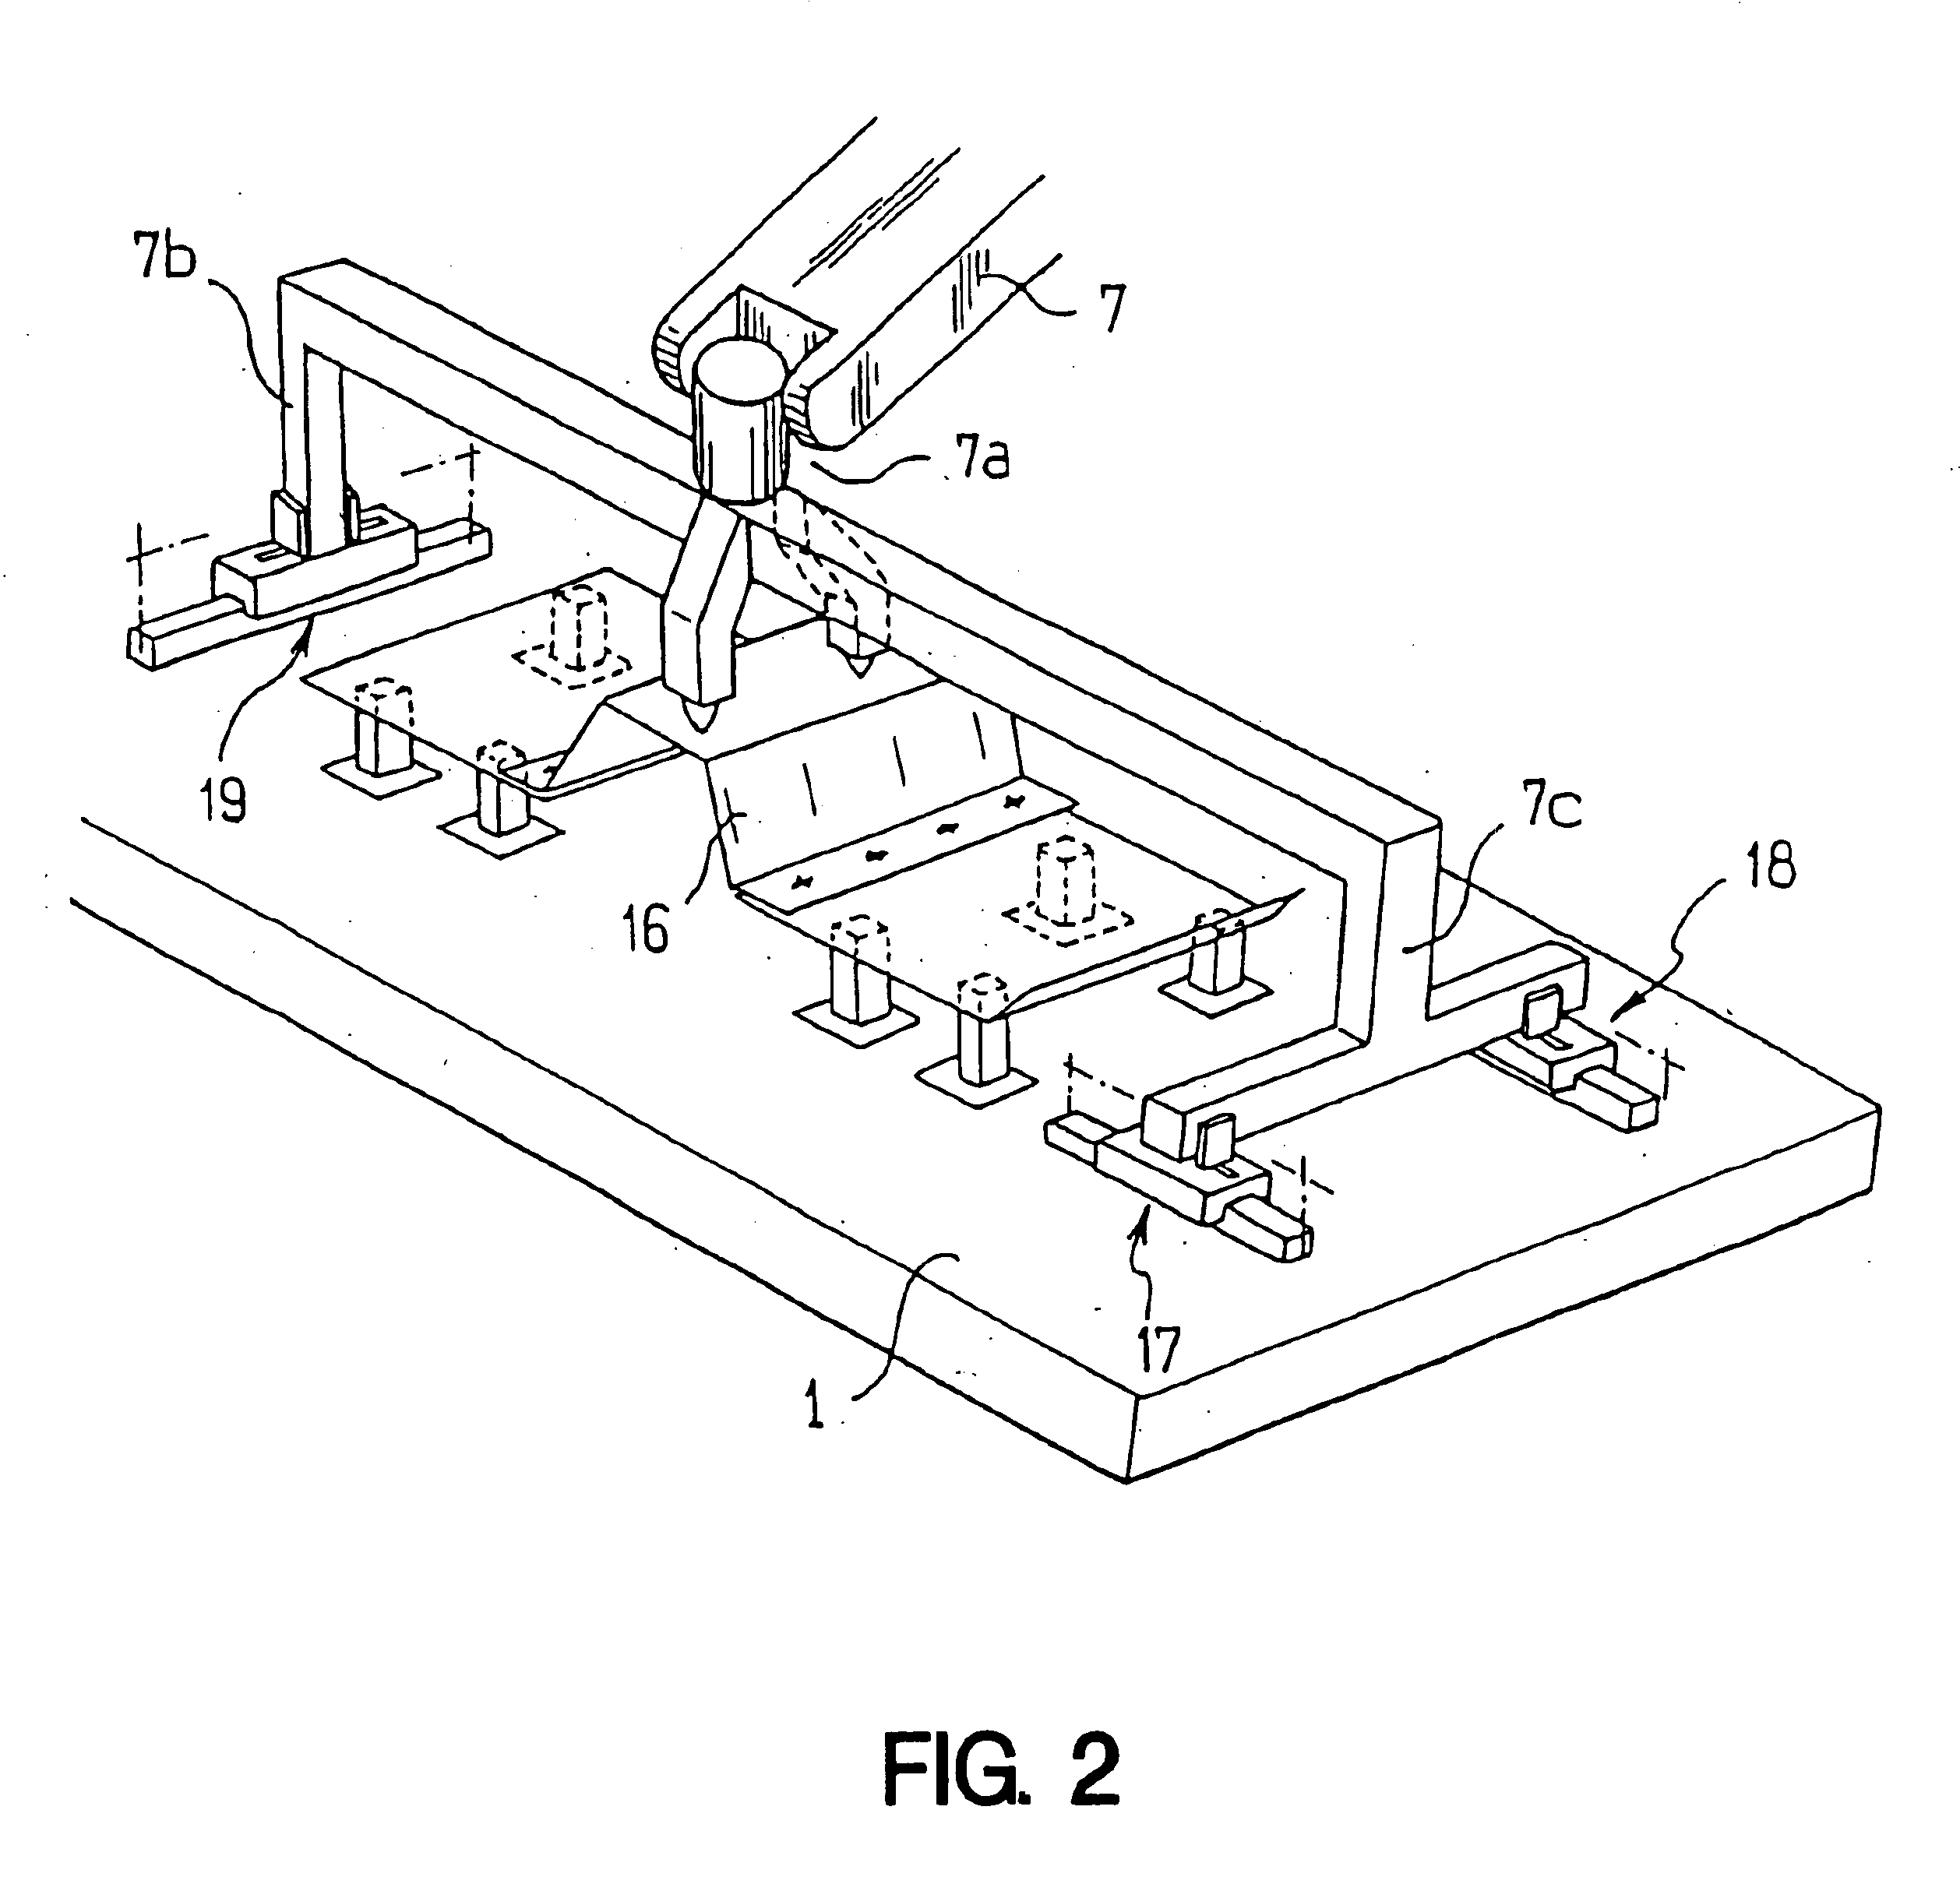 Method of holding a part in position in an assembly station